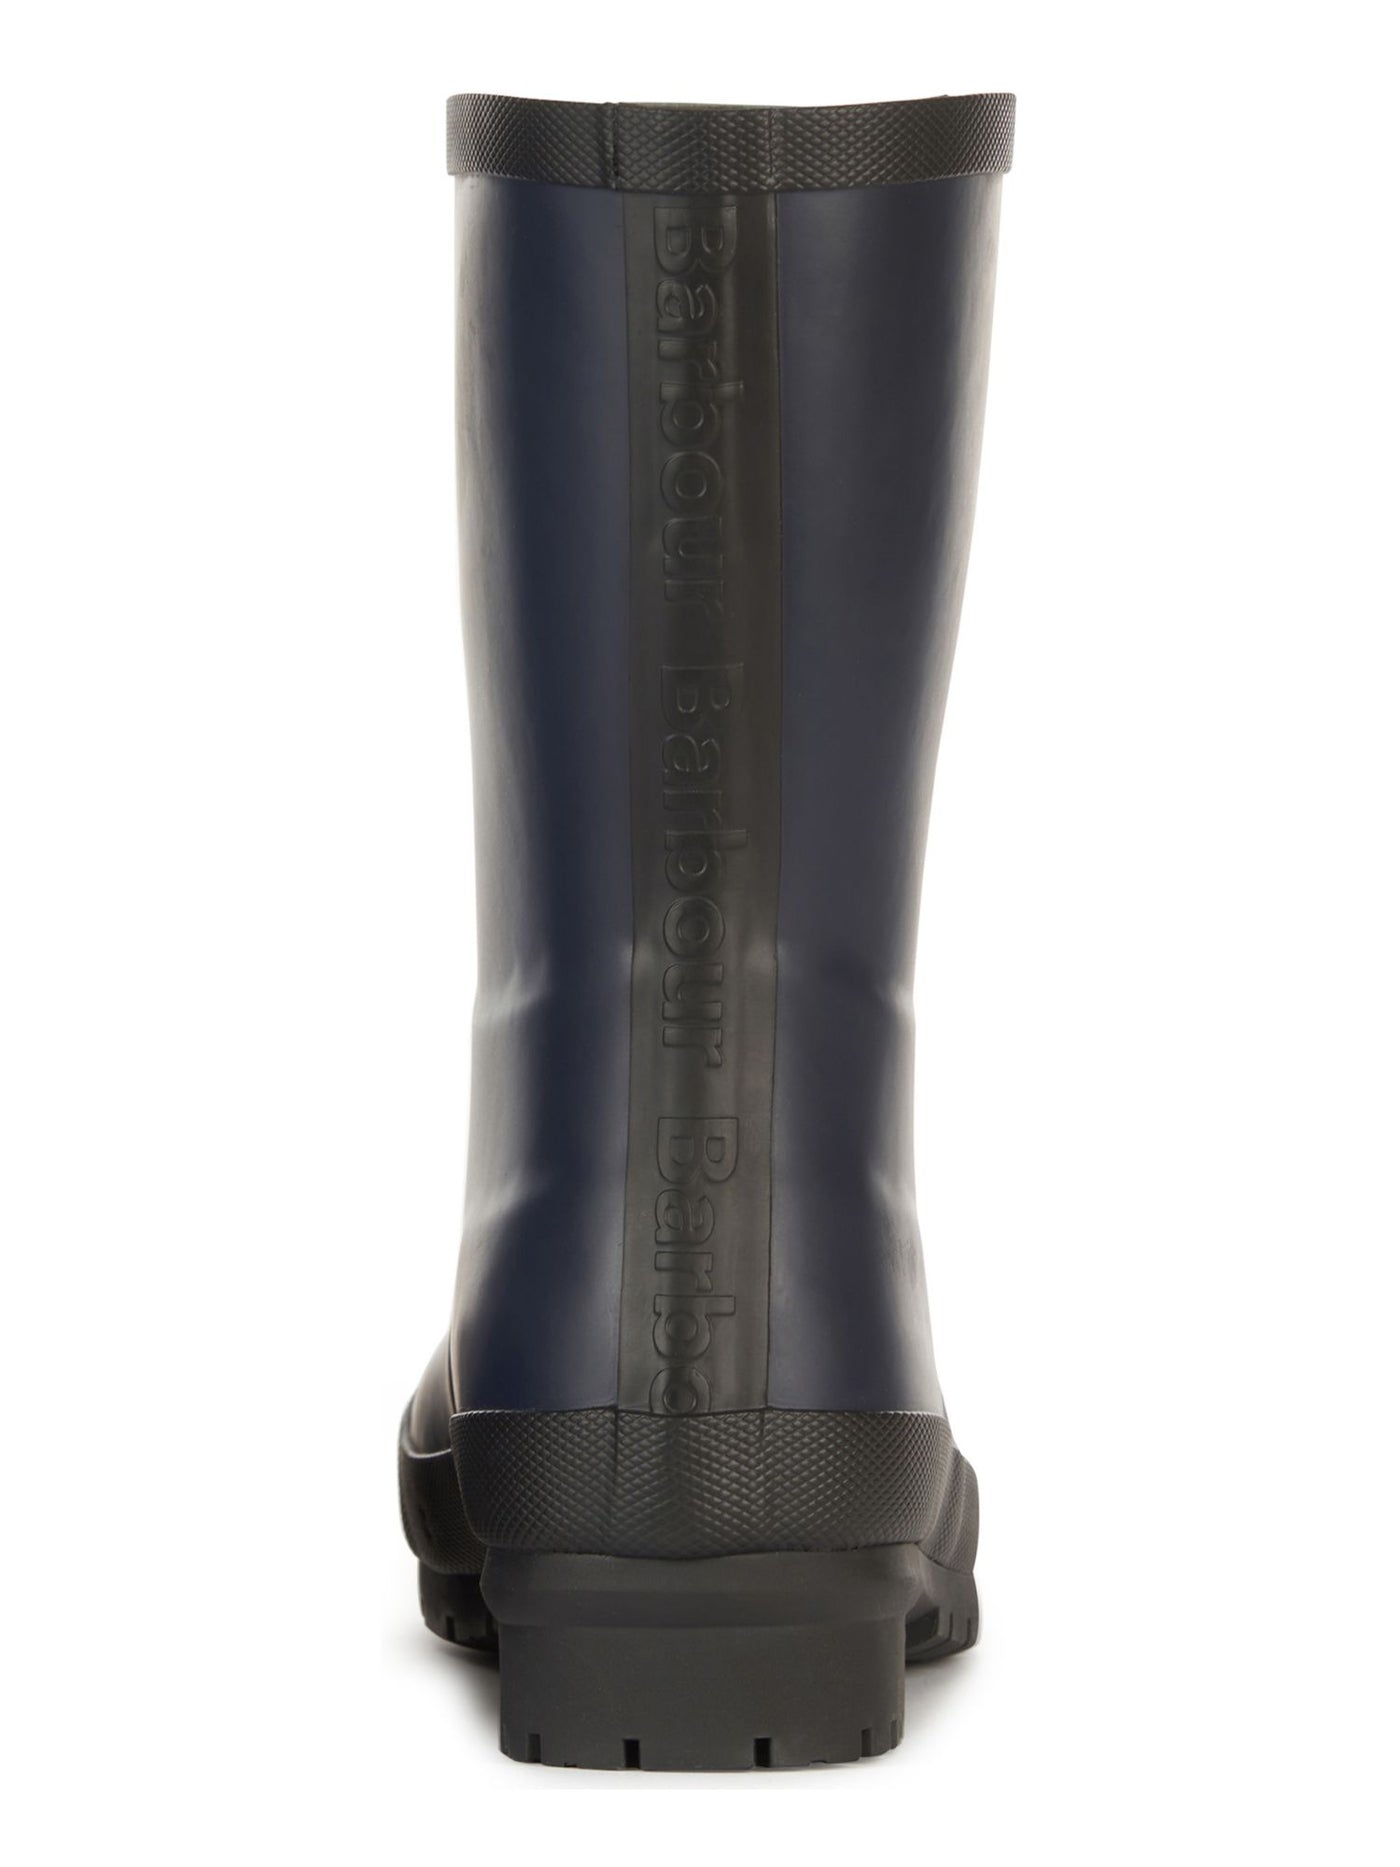 BARBOUR Womens Navy Water Resistant Padded Banbury Round Toe Slip On Rain Boots 4